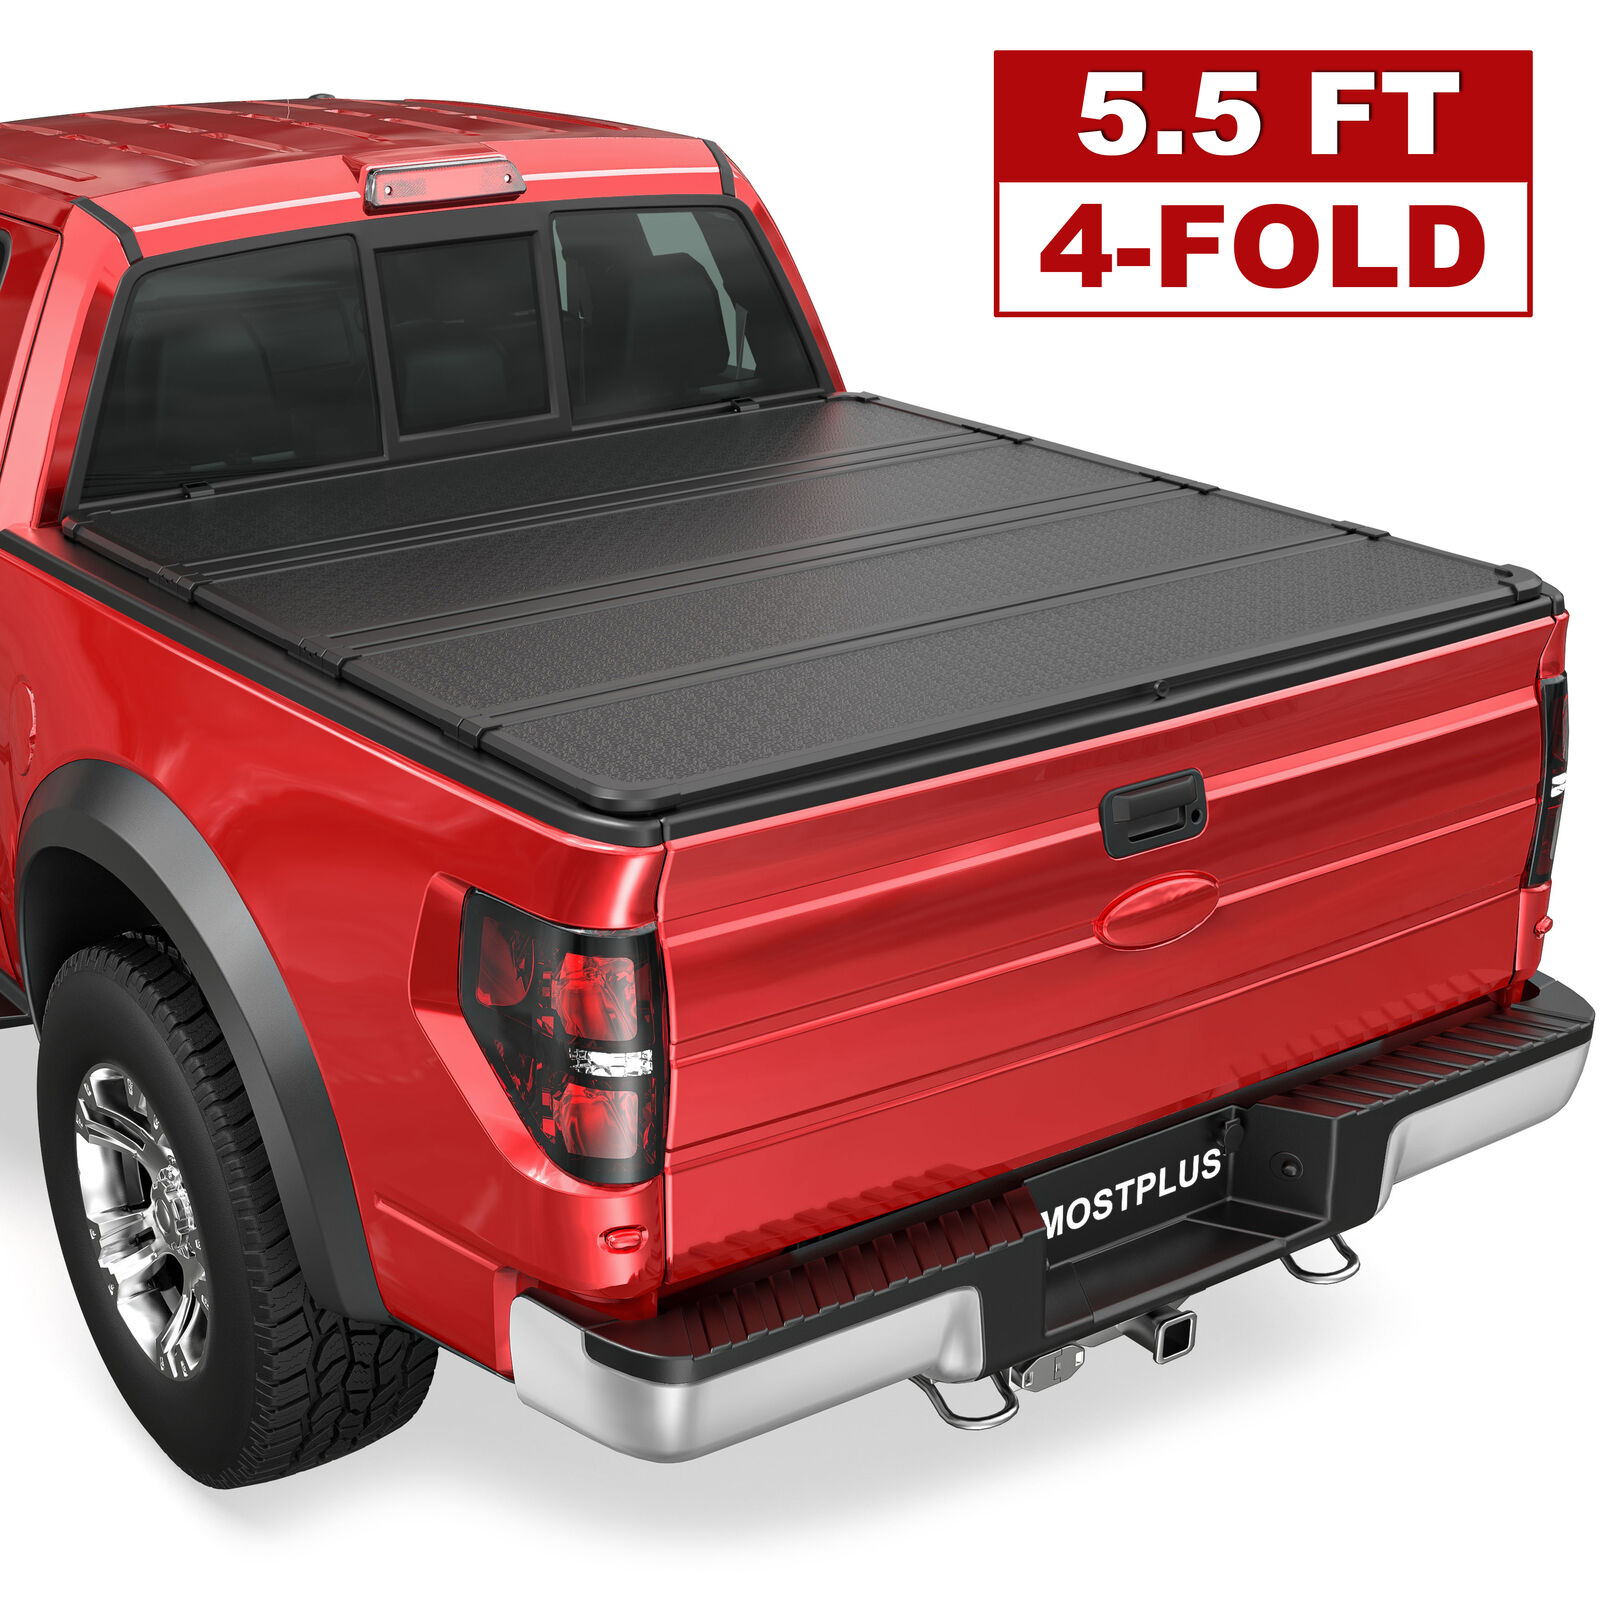 4 Fold 5.5FT Hard Truck Bed Tonneau Cover For 2009-2014 Ford F150 w/ Lamp On Top